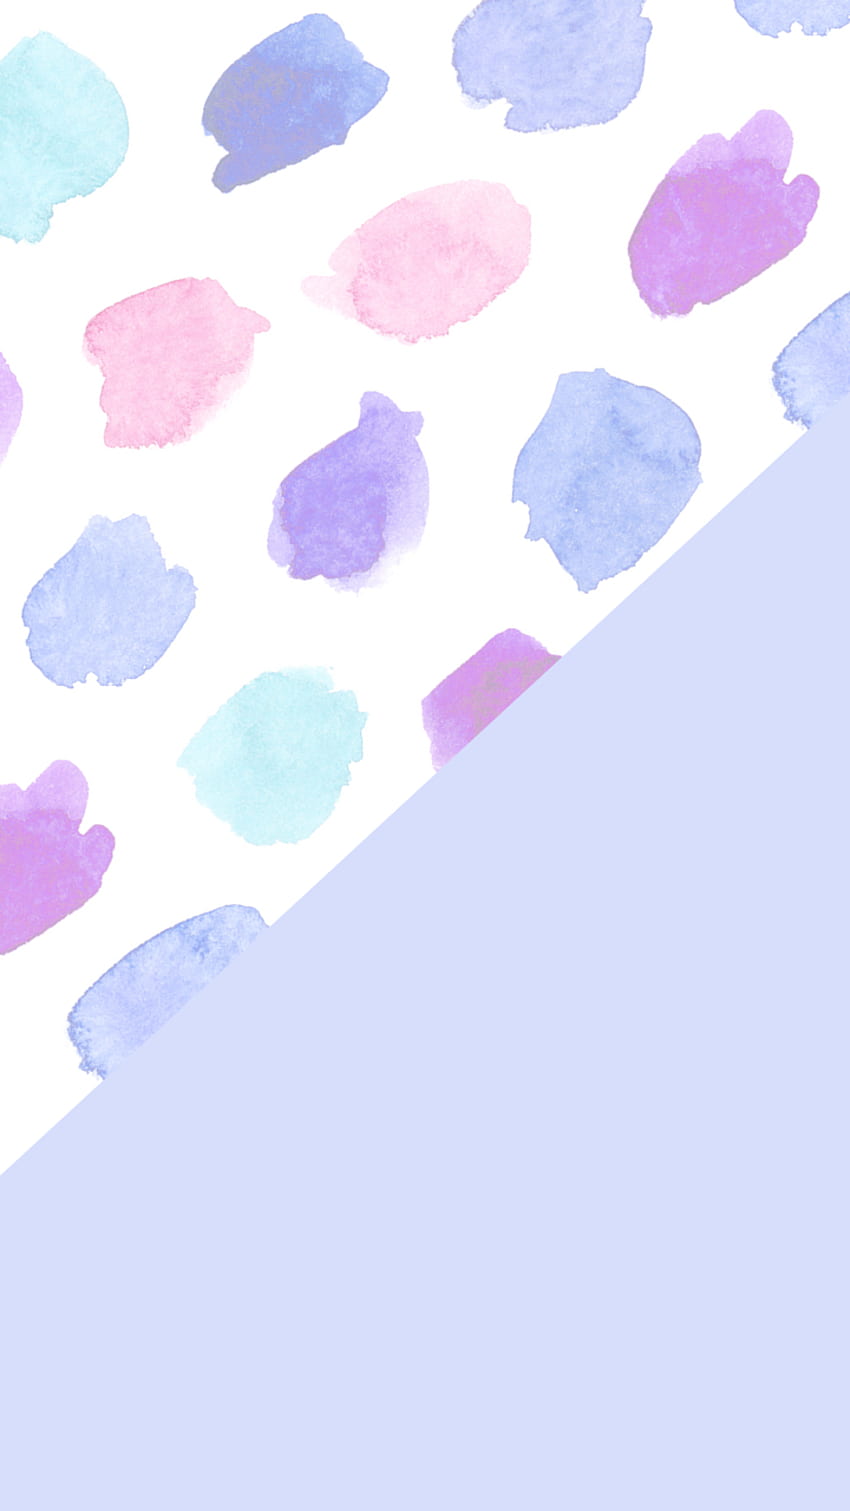 99+) iphone . Pastel iphone , Cute patterns , Aesthetic iphone, Tumblr Aesthetic Pastel HD phone wallpaper